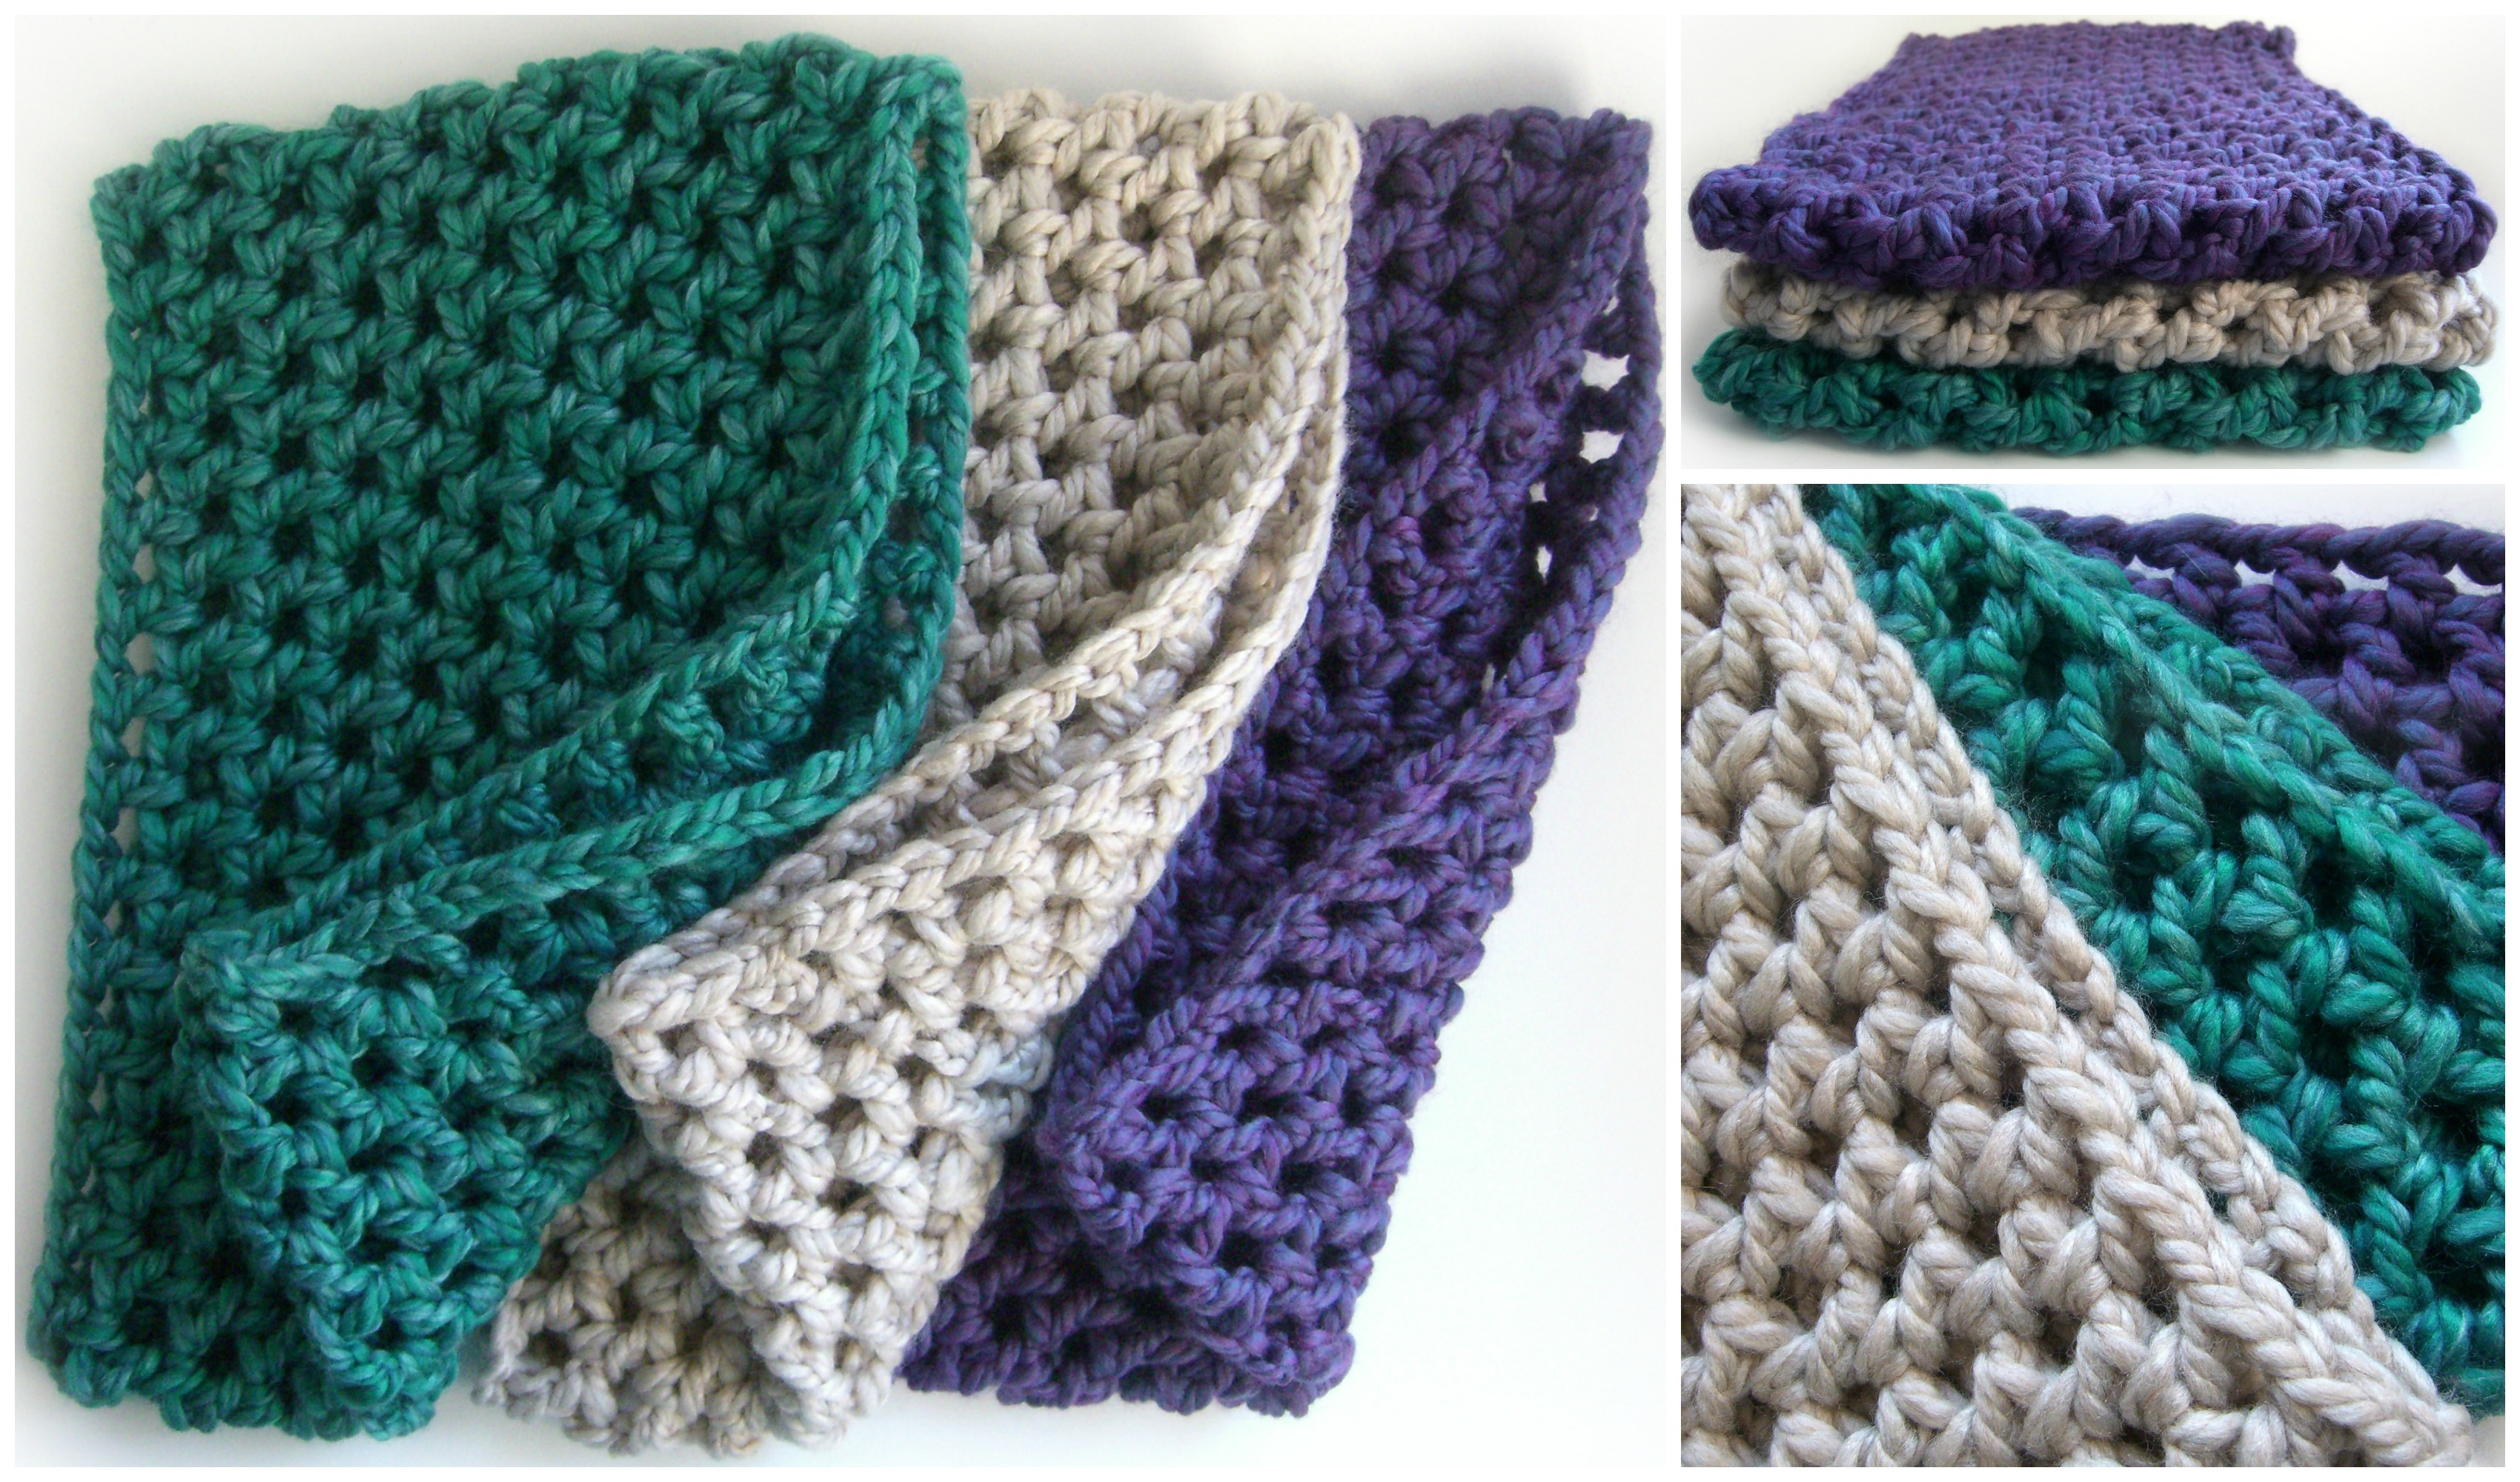 Easy One Skein Crochet Patterns Crocheted Cowls For The Family Hookabee